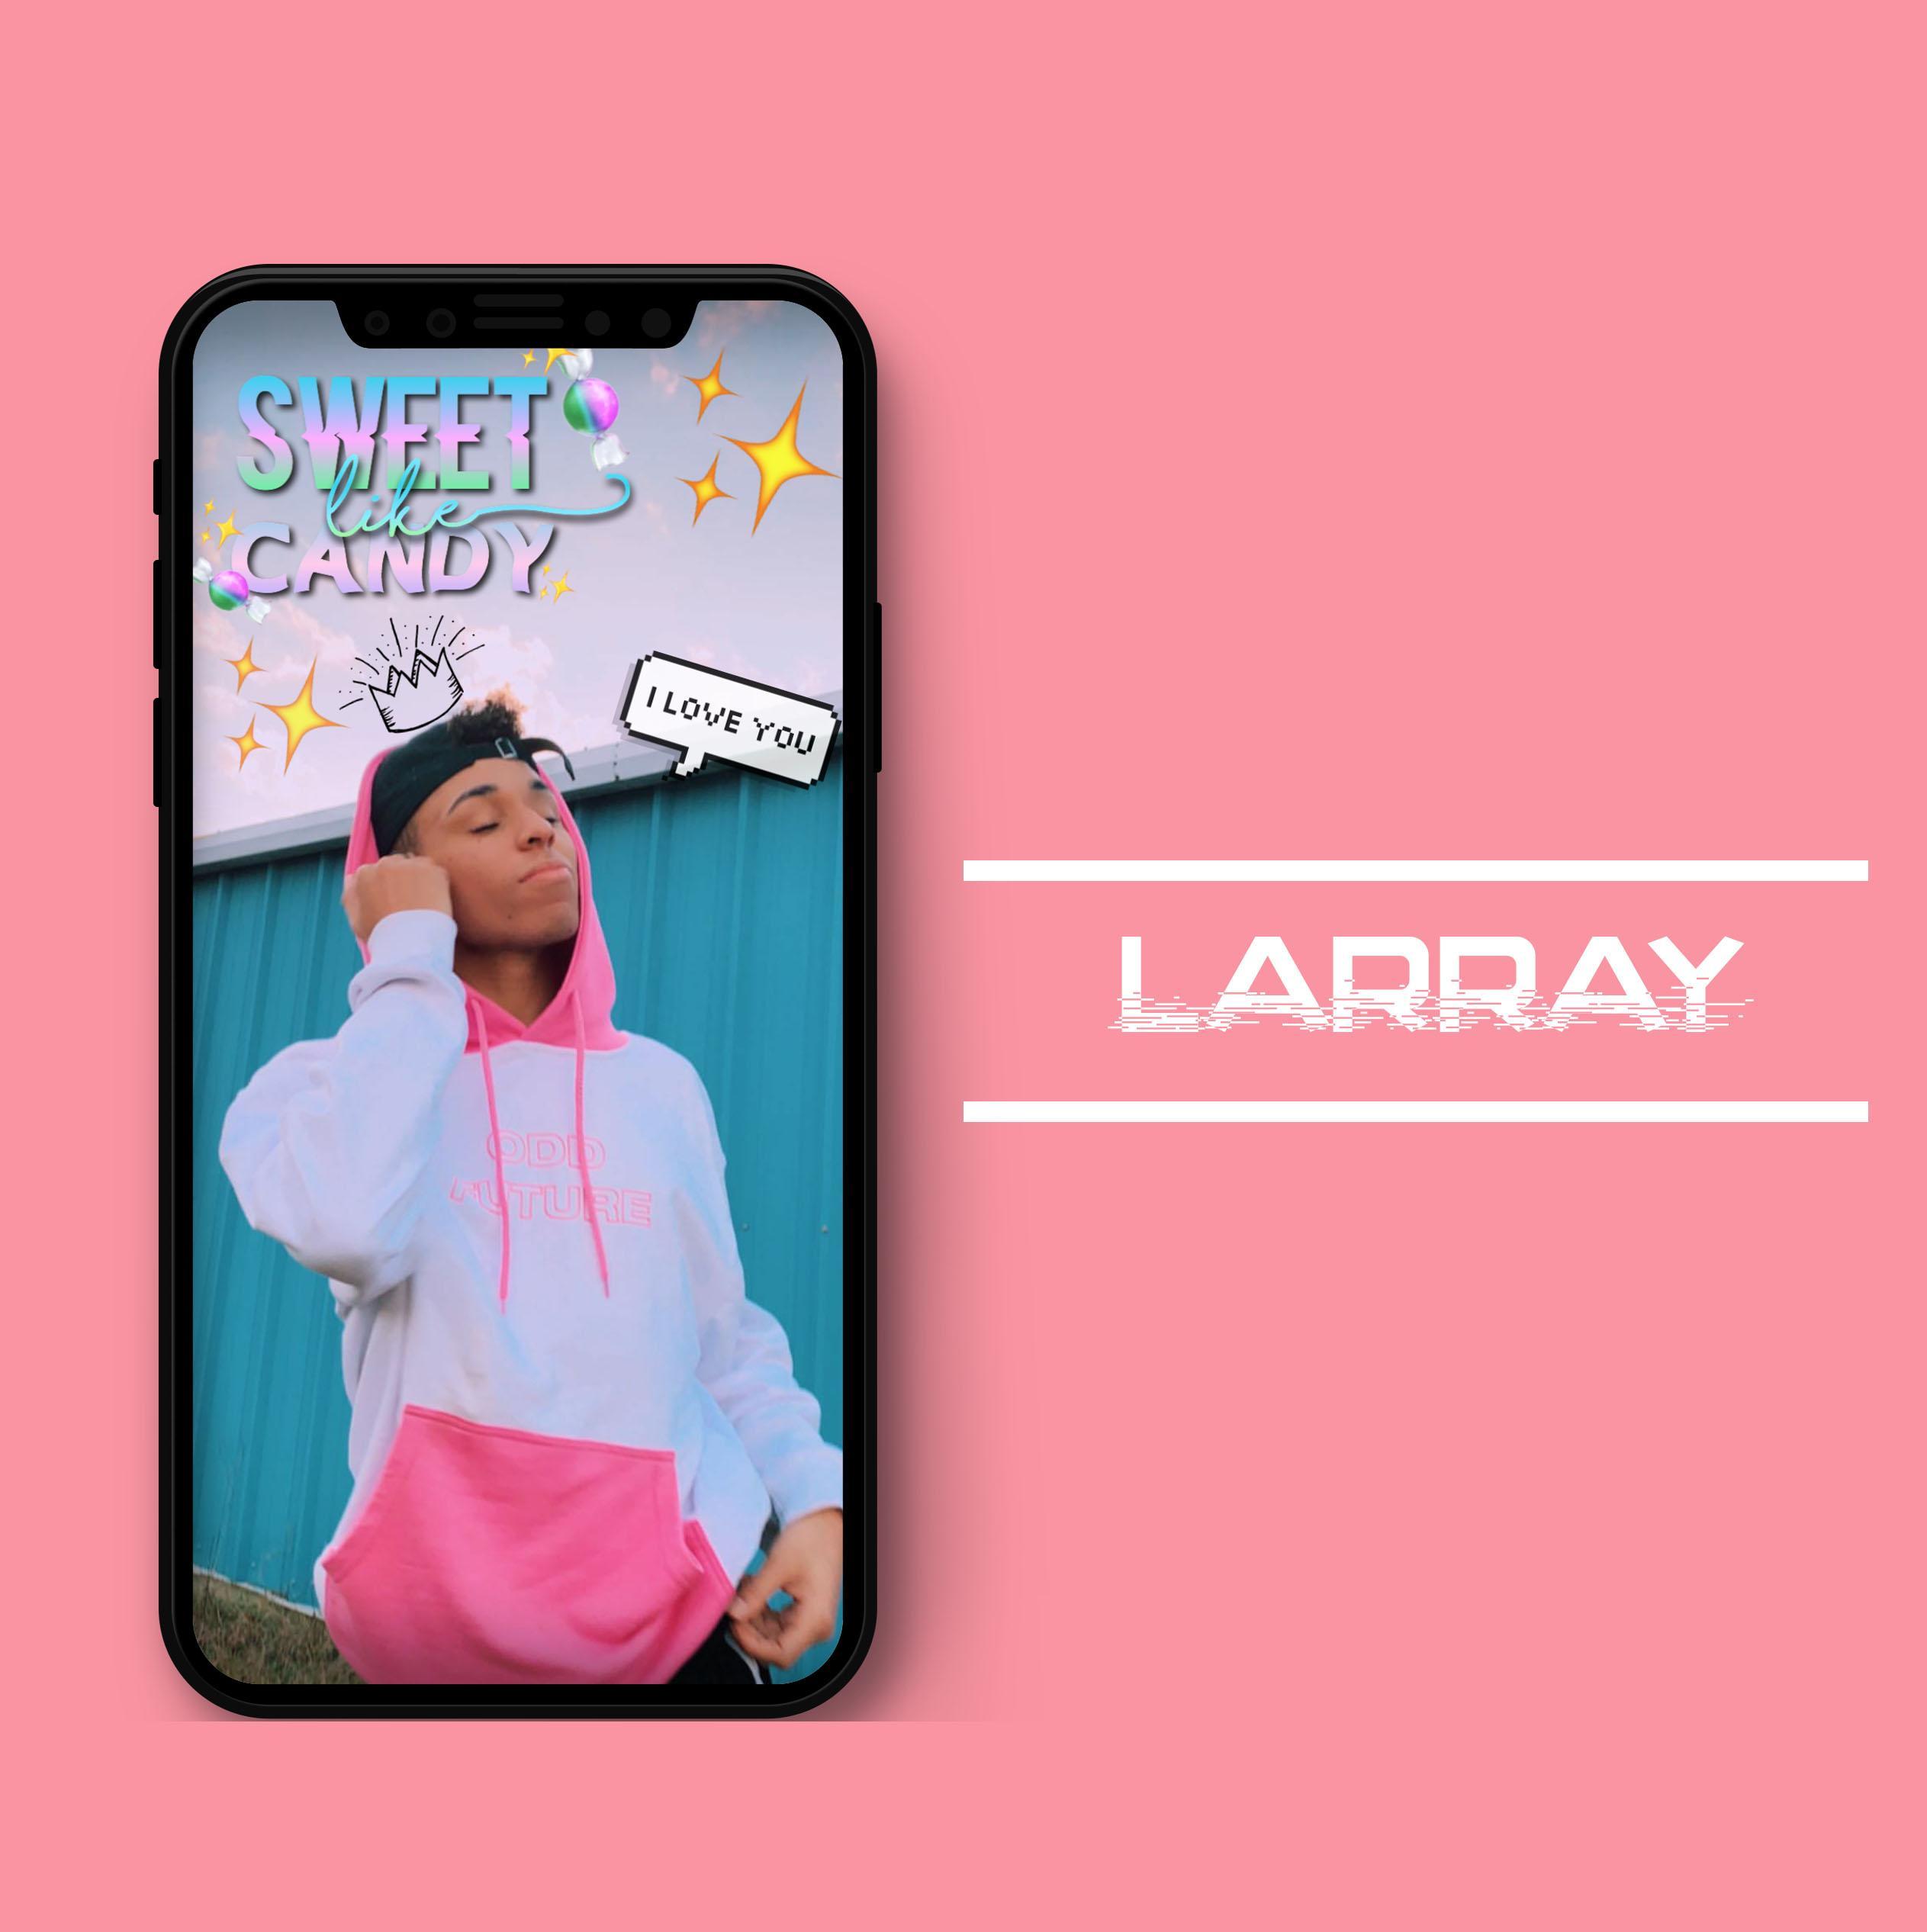 Larray Wallpaper Hd 4k For Android Apk Download